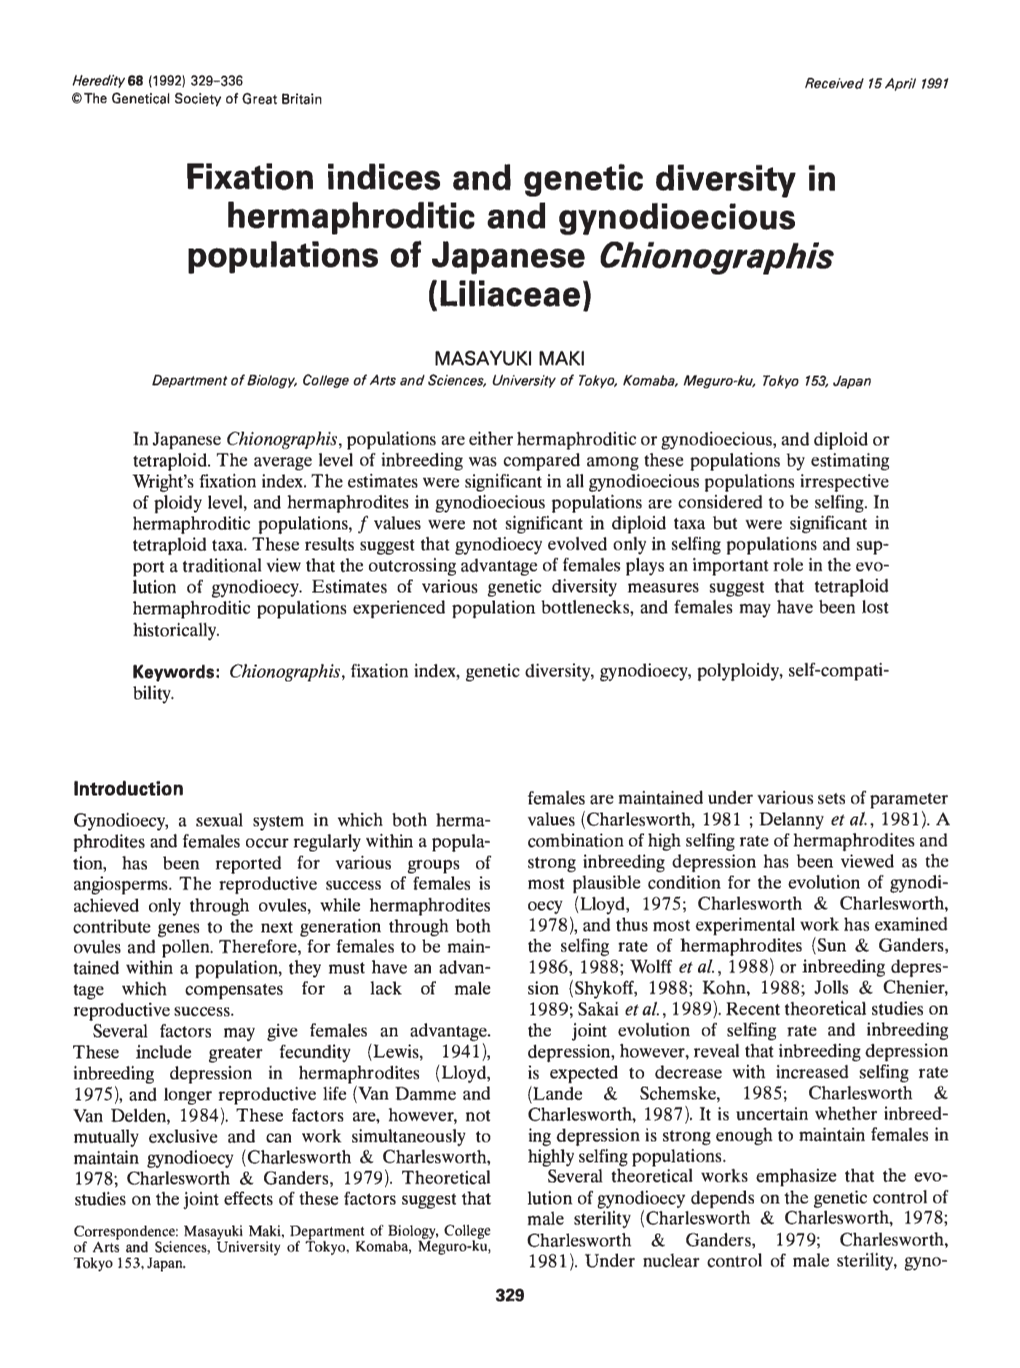 Fixation Indices and Genetic Diversity in Hermaphroditic and Gynodioecious Populations of Japanese Chionographis (Liliaceae)